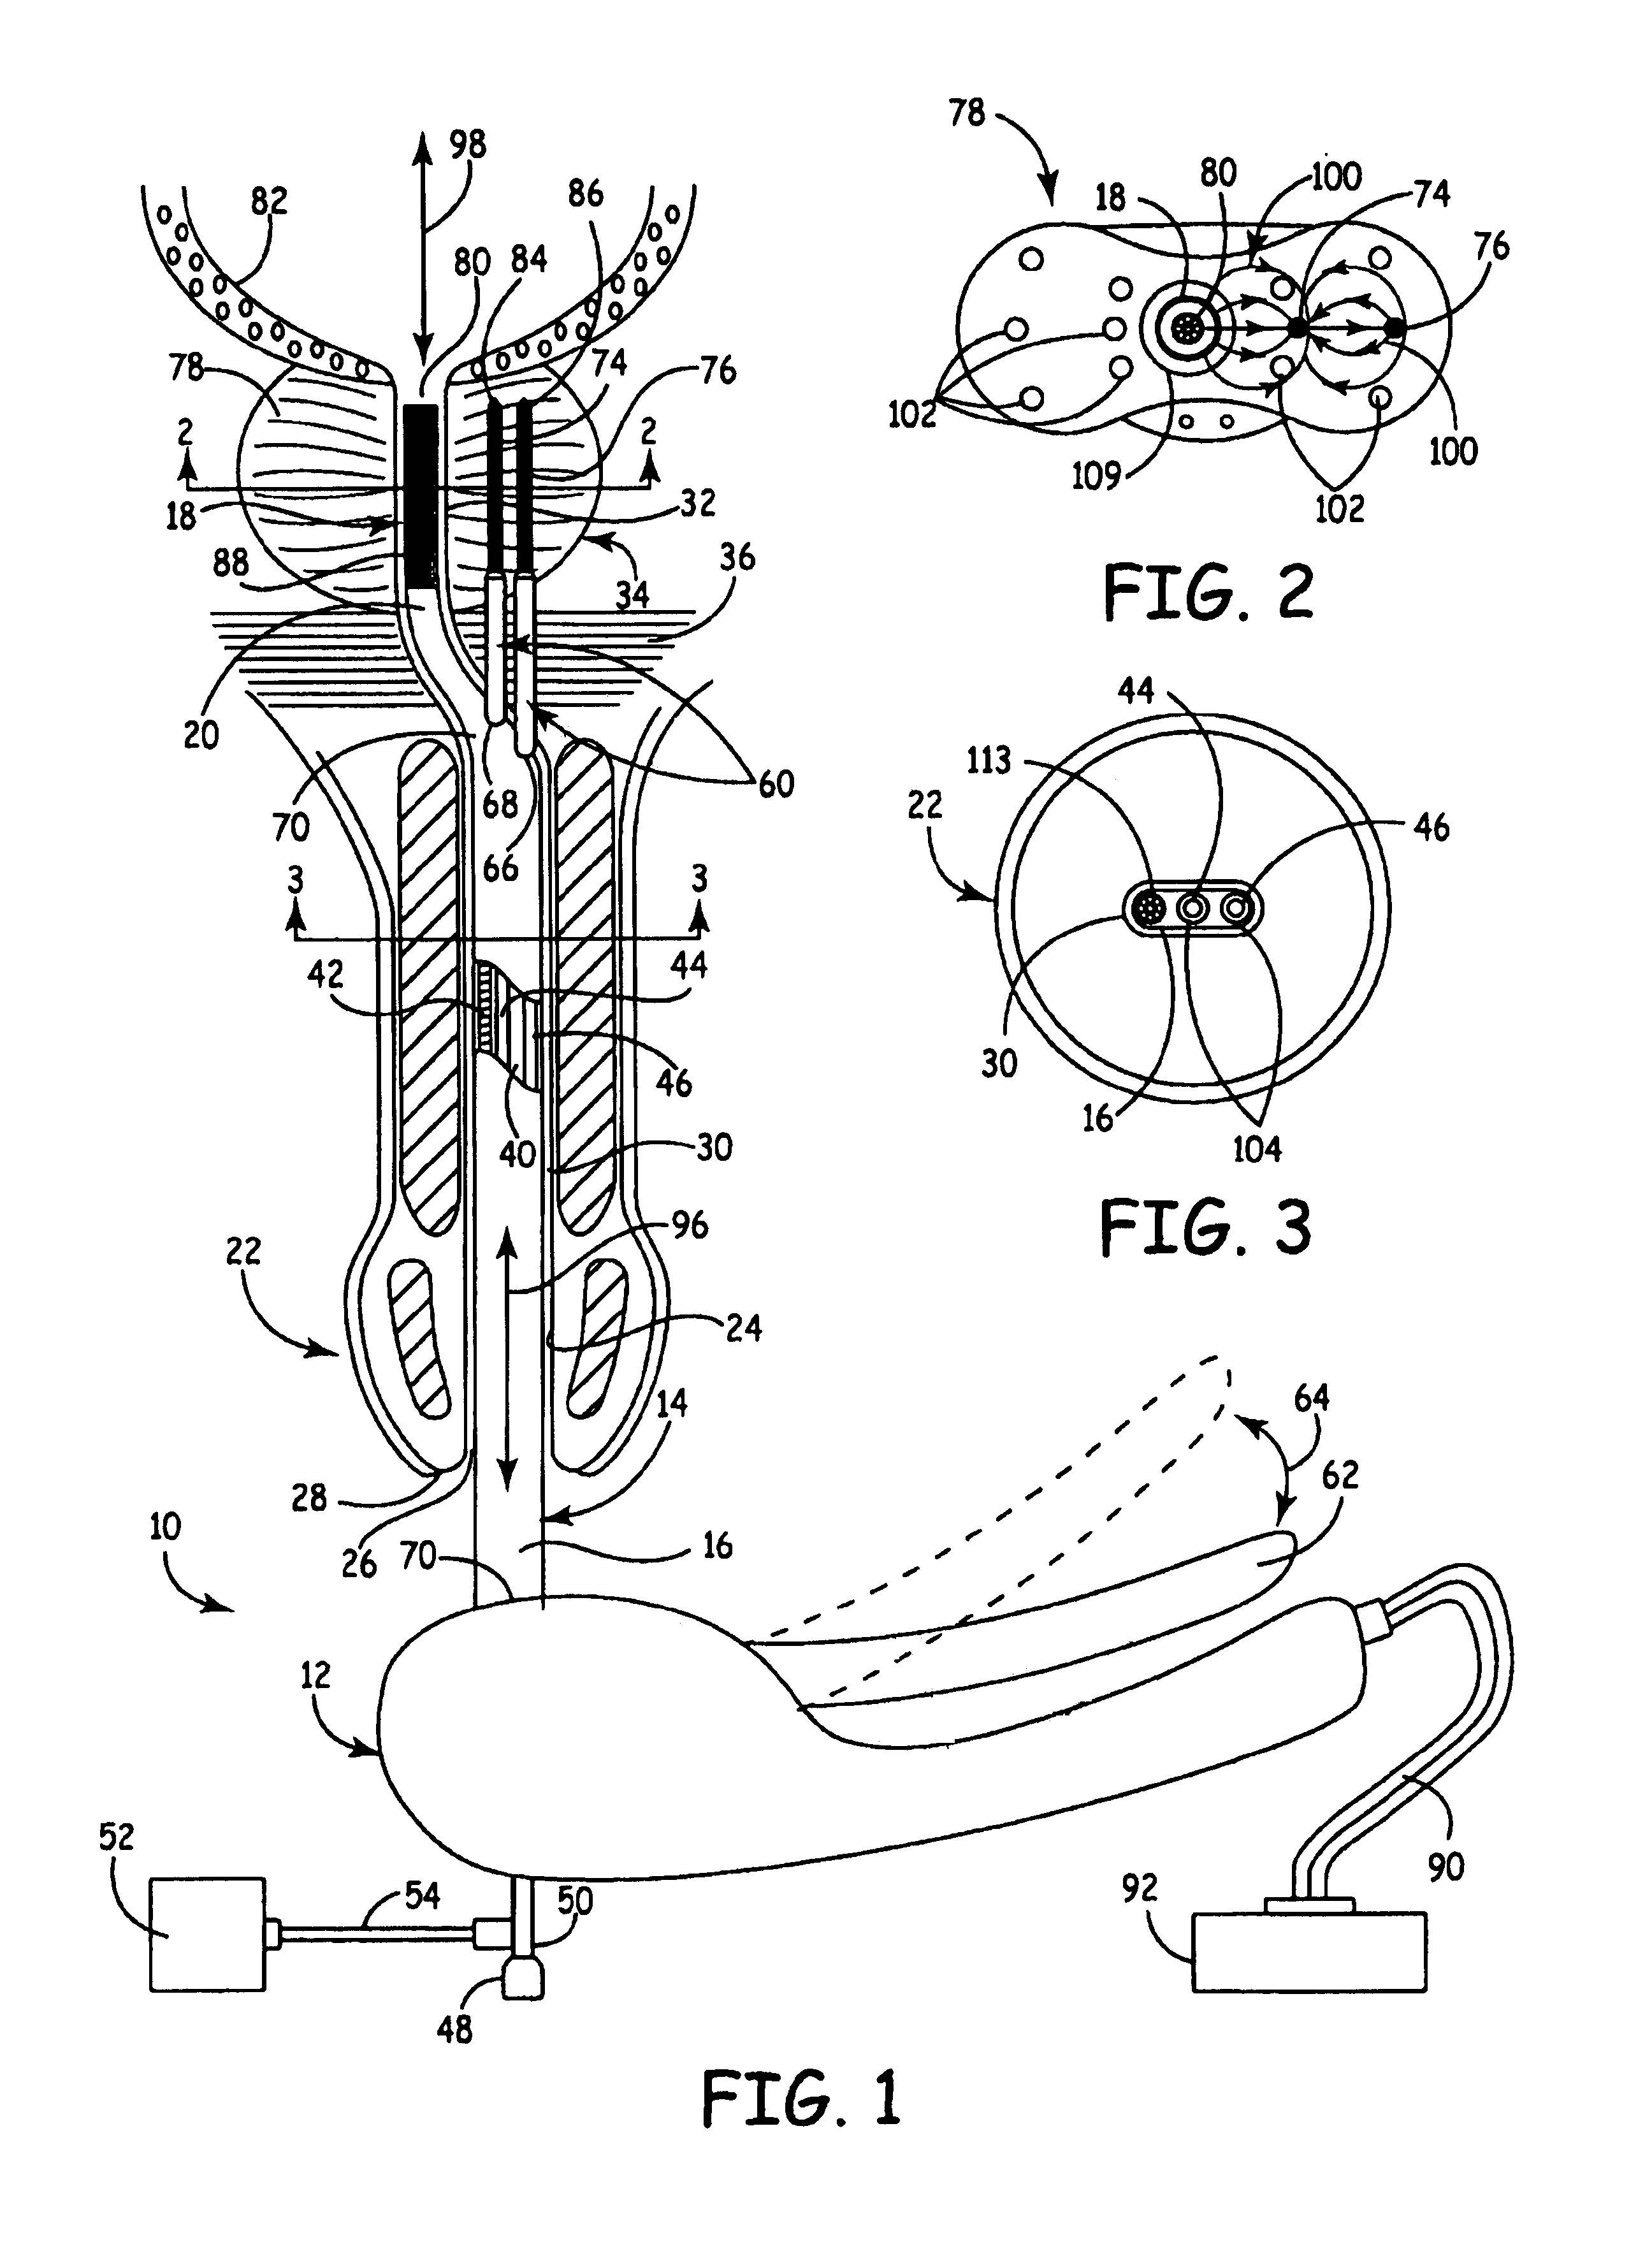 Apparatus and method for the treatment of benign prostatic hyperplasia